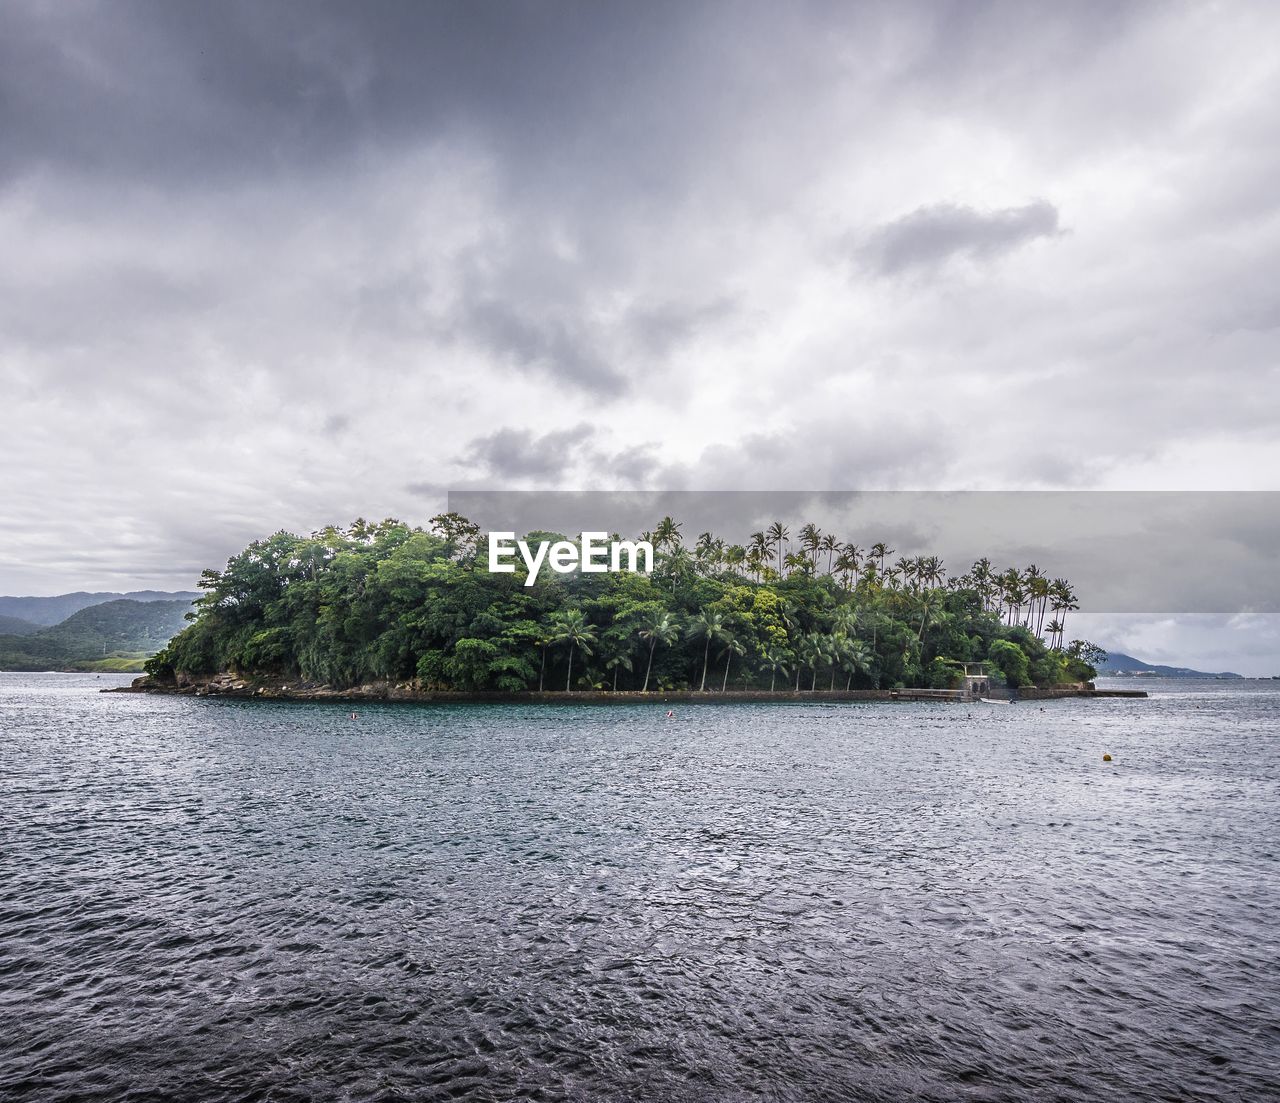 SCENIC VIEW OF ISLAND AGAINST SKY